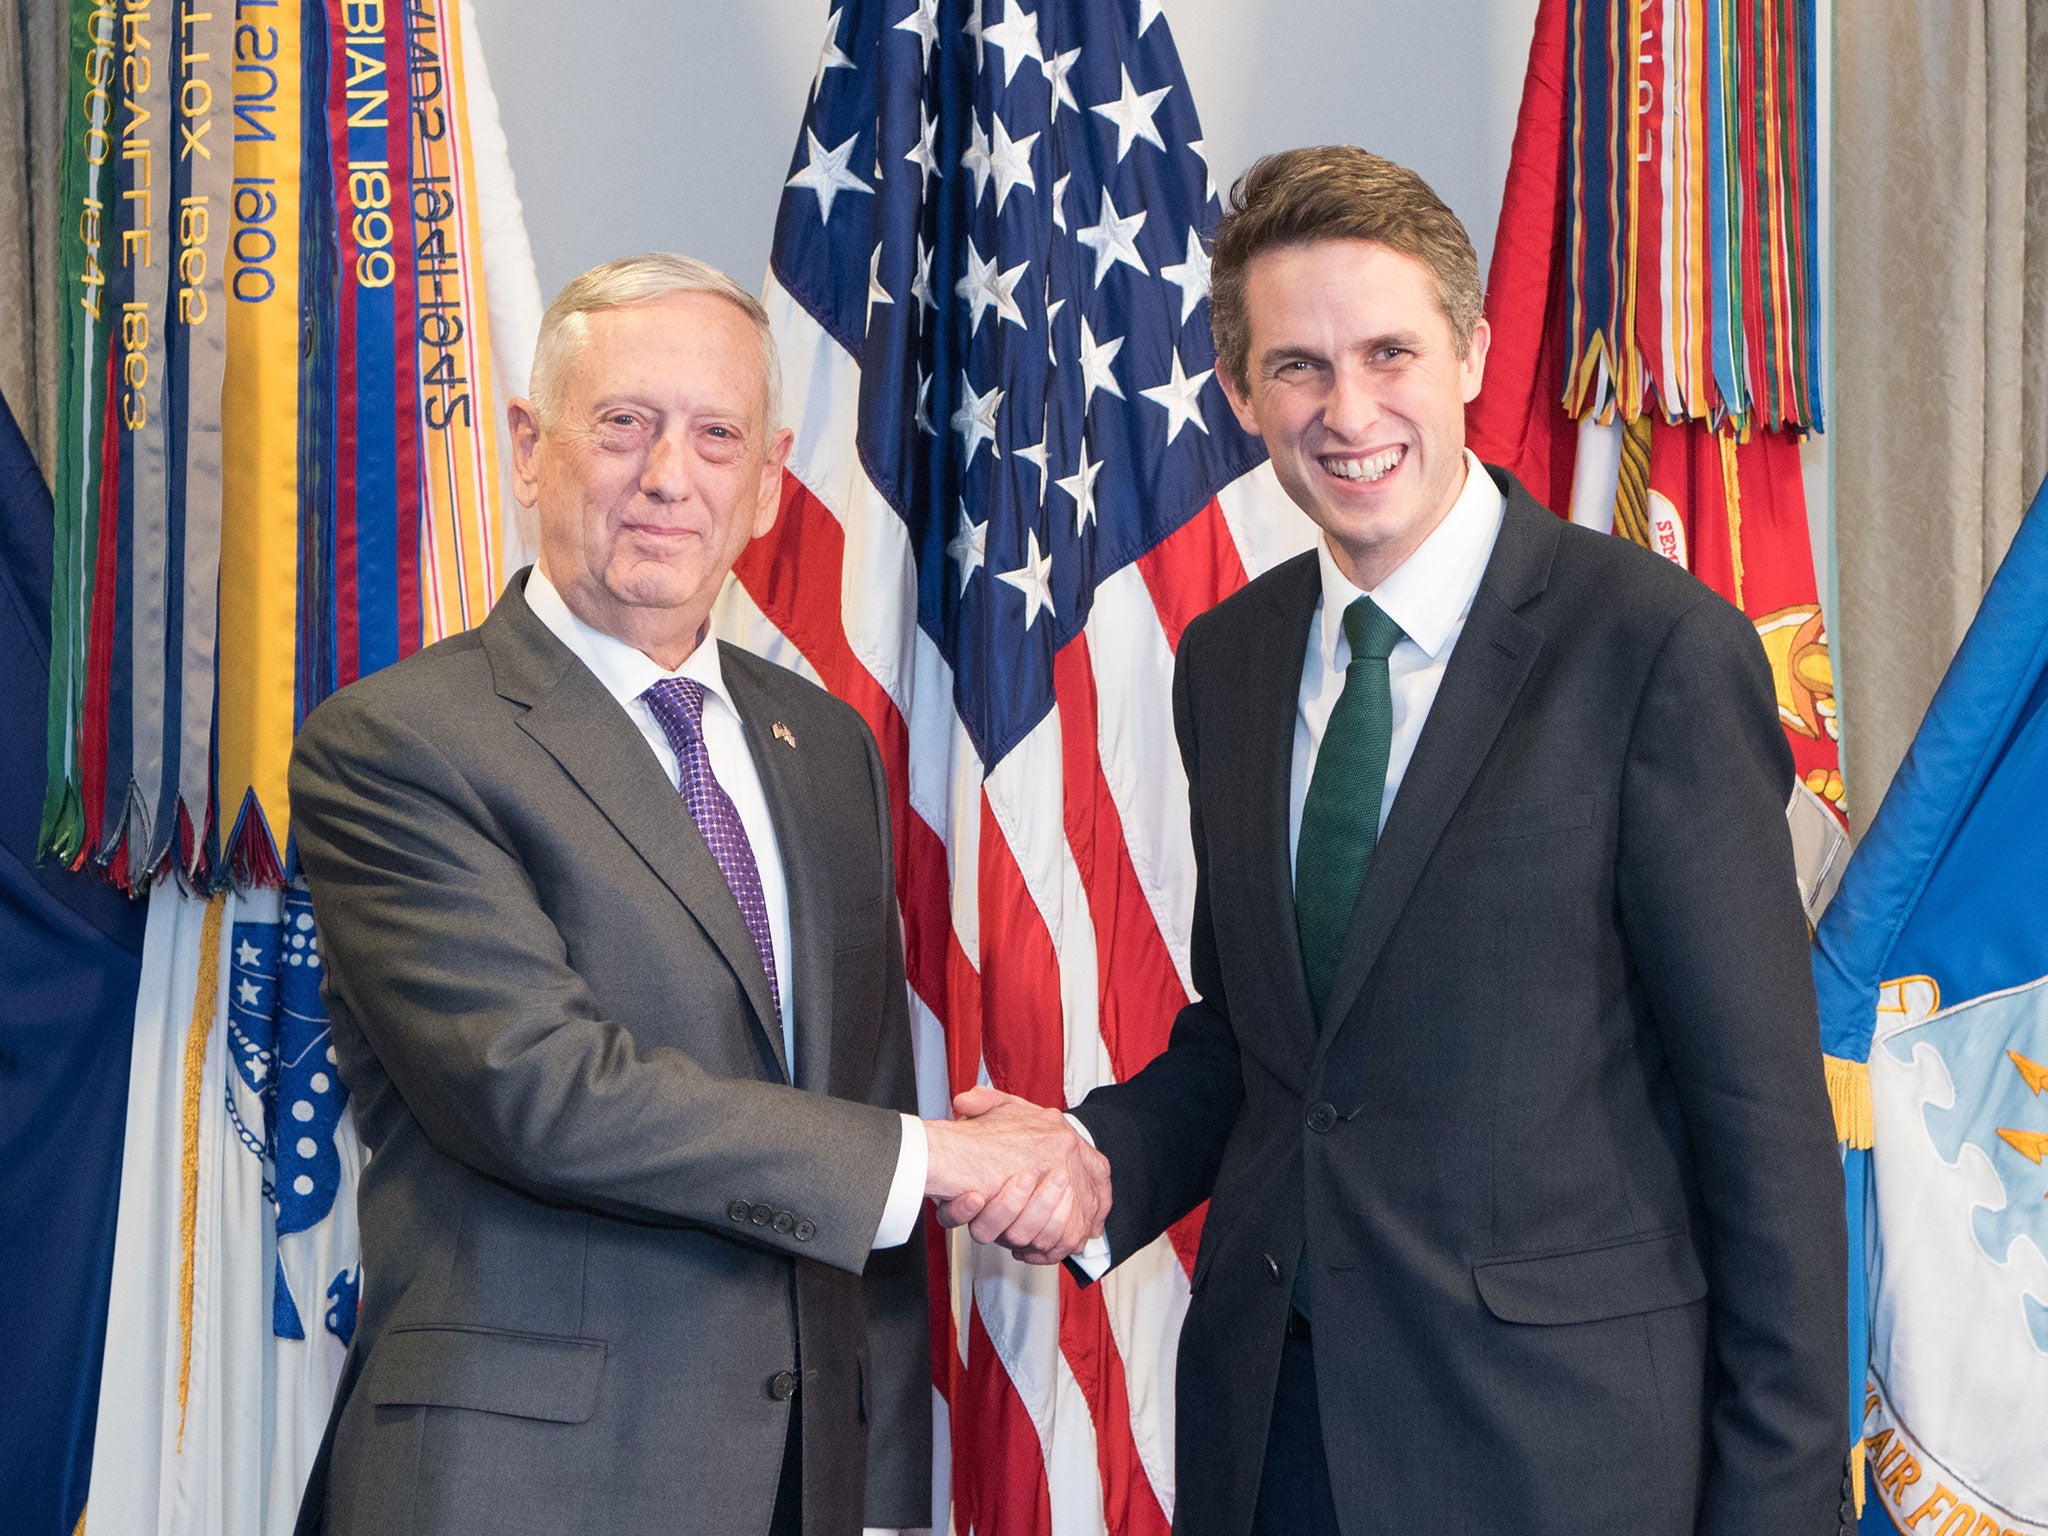 Defence secretary Gavin Williamson (right) and US counterpart Jim Mattis, who wrote the letter that was leaked